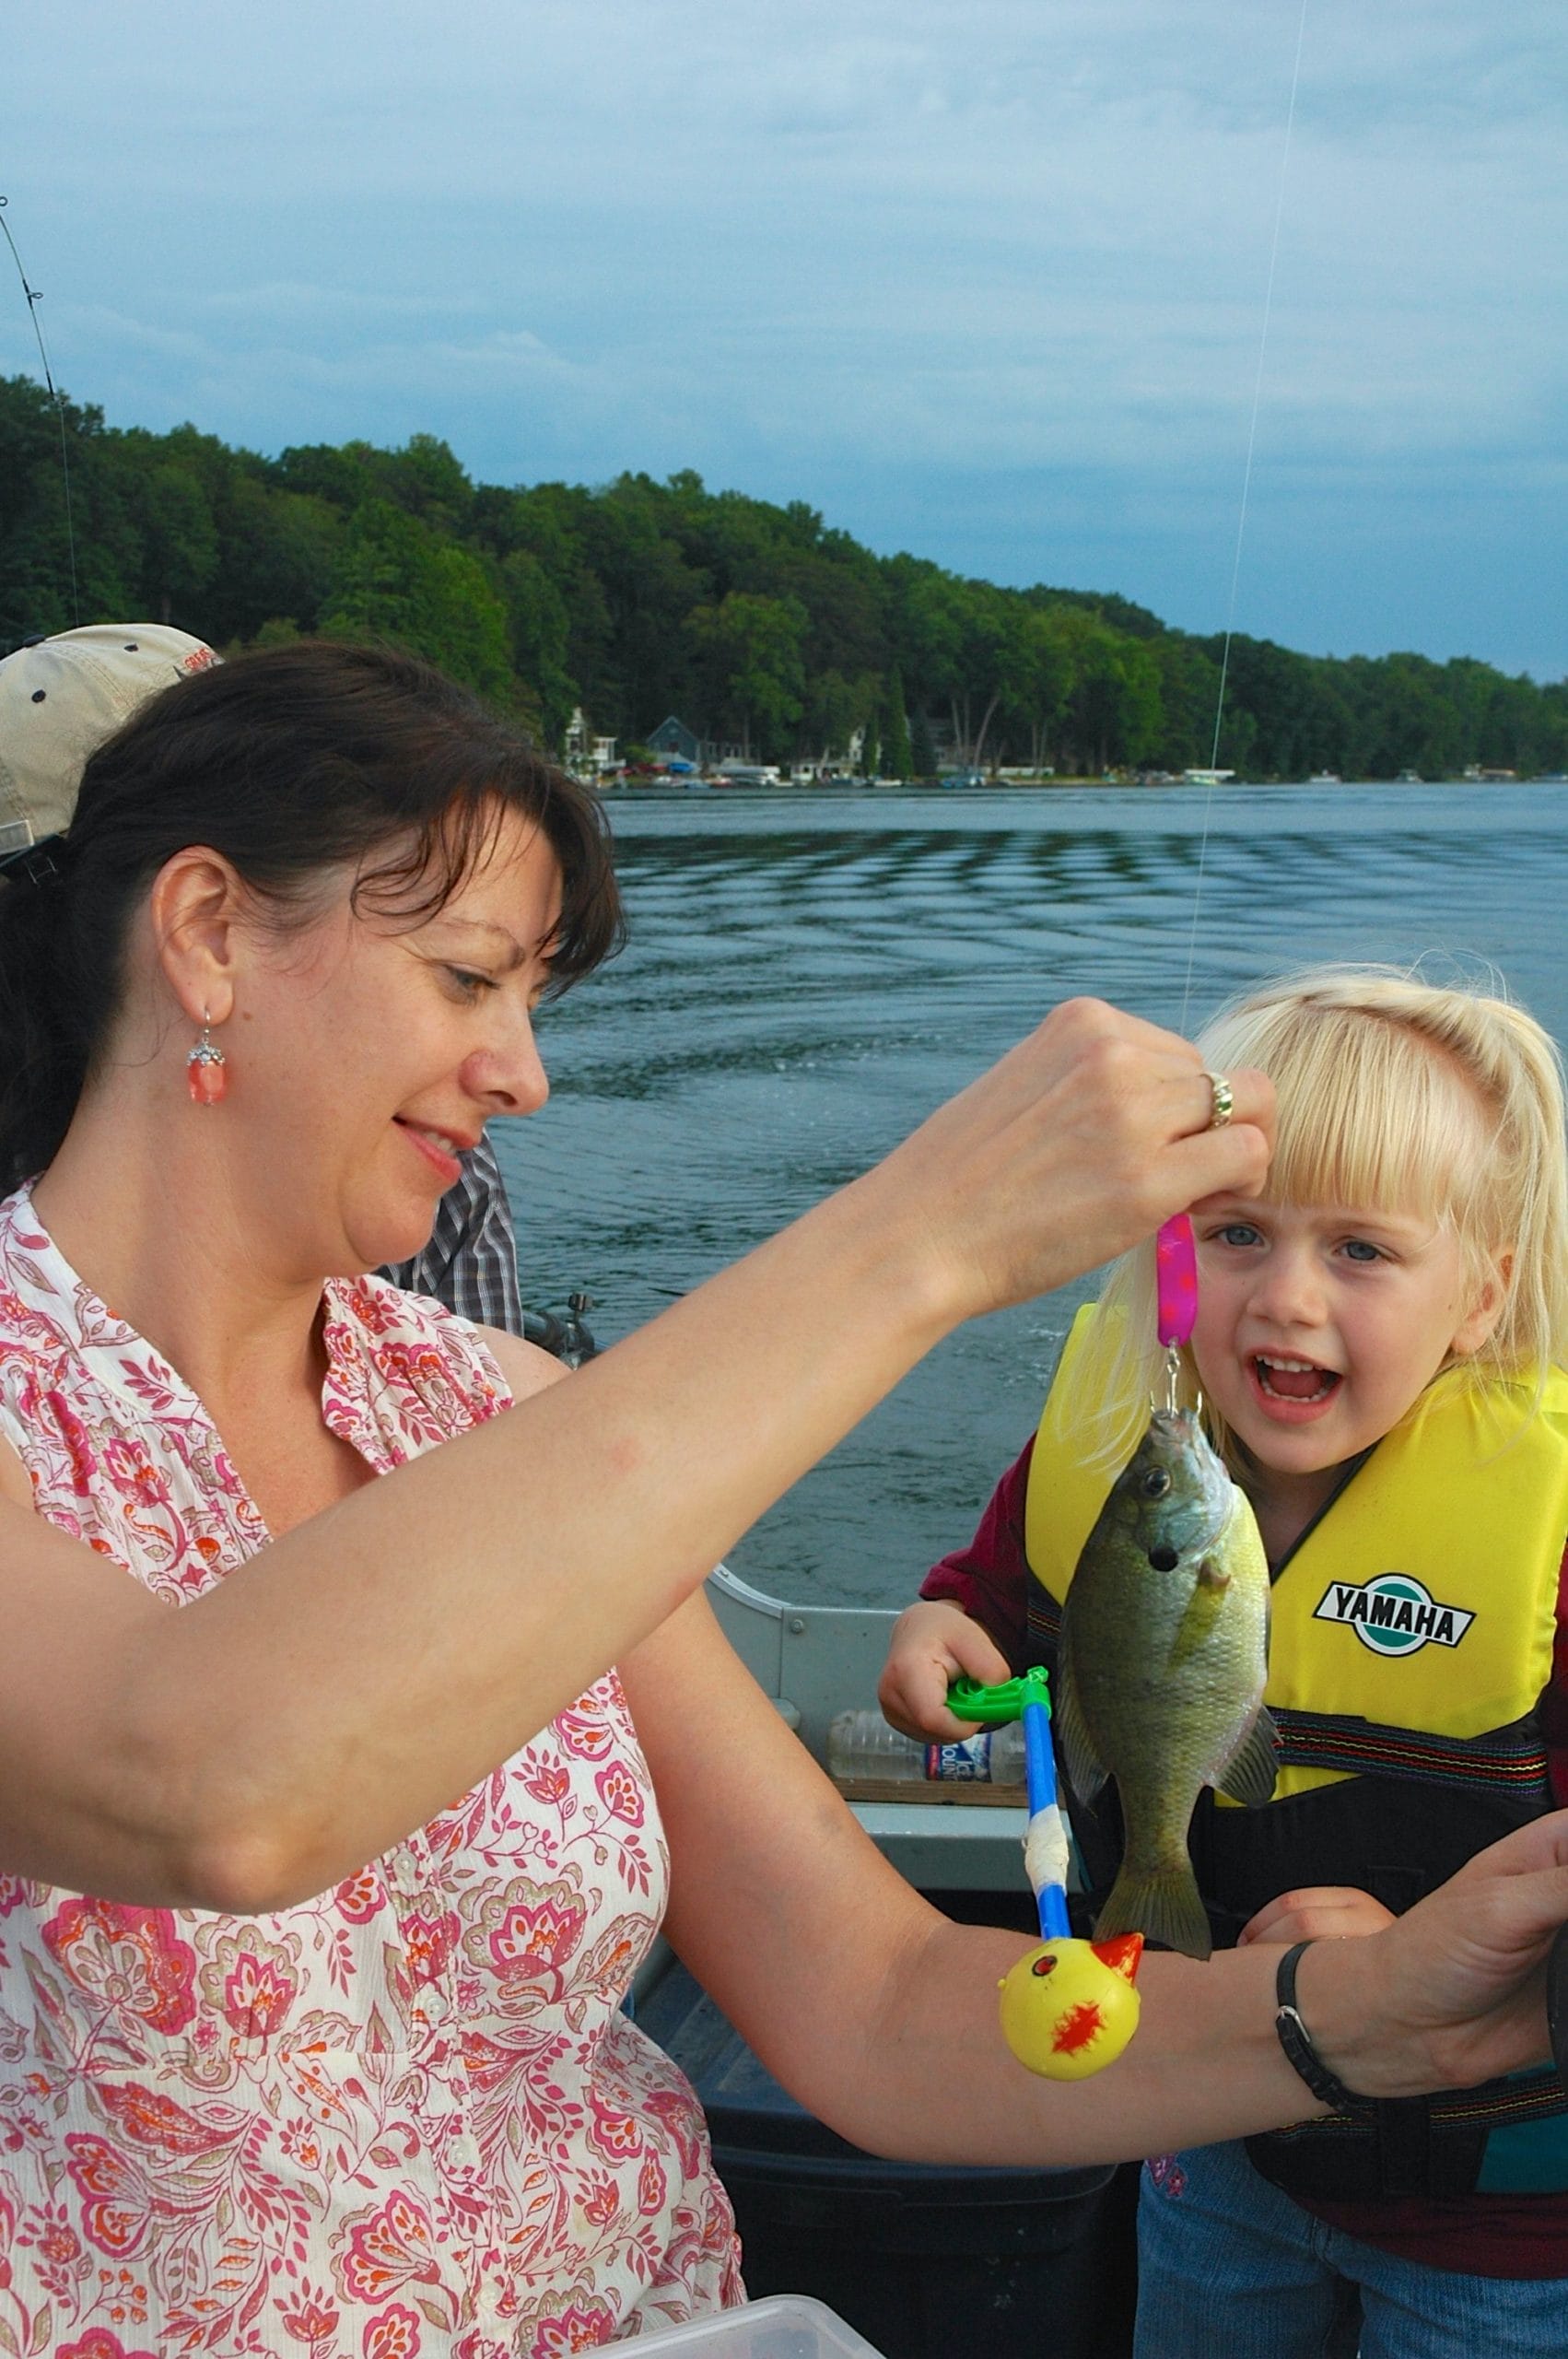 Trolling for bluegill is a great technique for kids to get in on the action. Here, Kathy Terpstra and Andrea Essenburg admire a bluegill Andrea reeled in after it hit a small Stinger Scorpion spoon trolled with a downrigger on a Michigan lake.